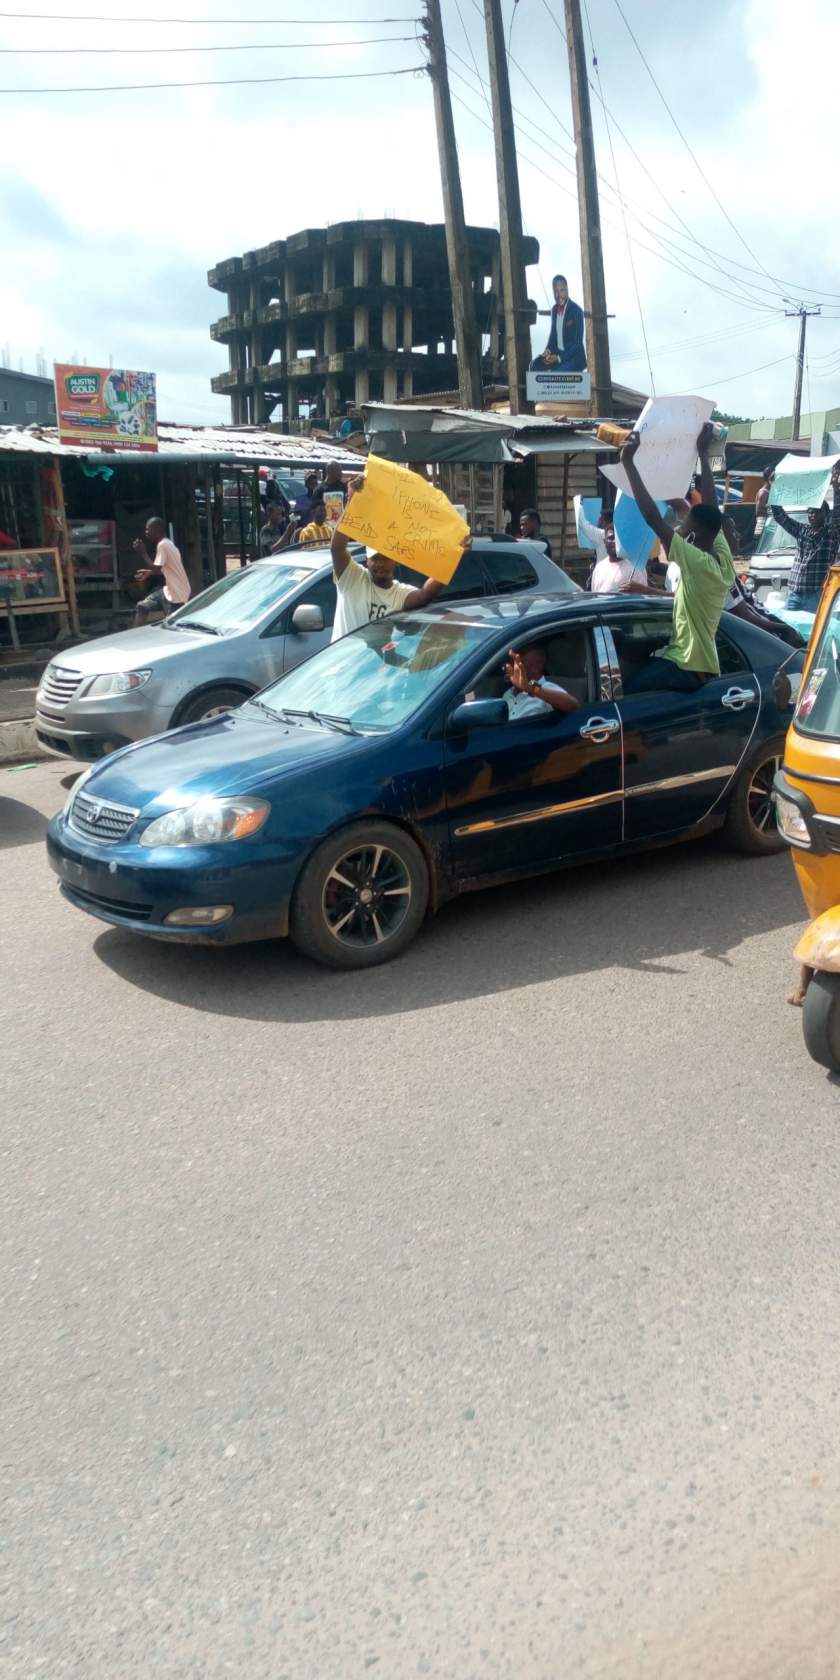 End SARS: Protesters storm Abeokuta with charms (Photos)